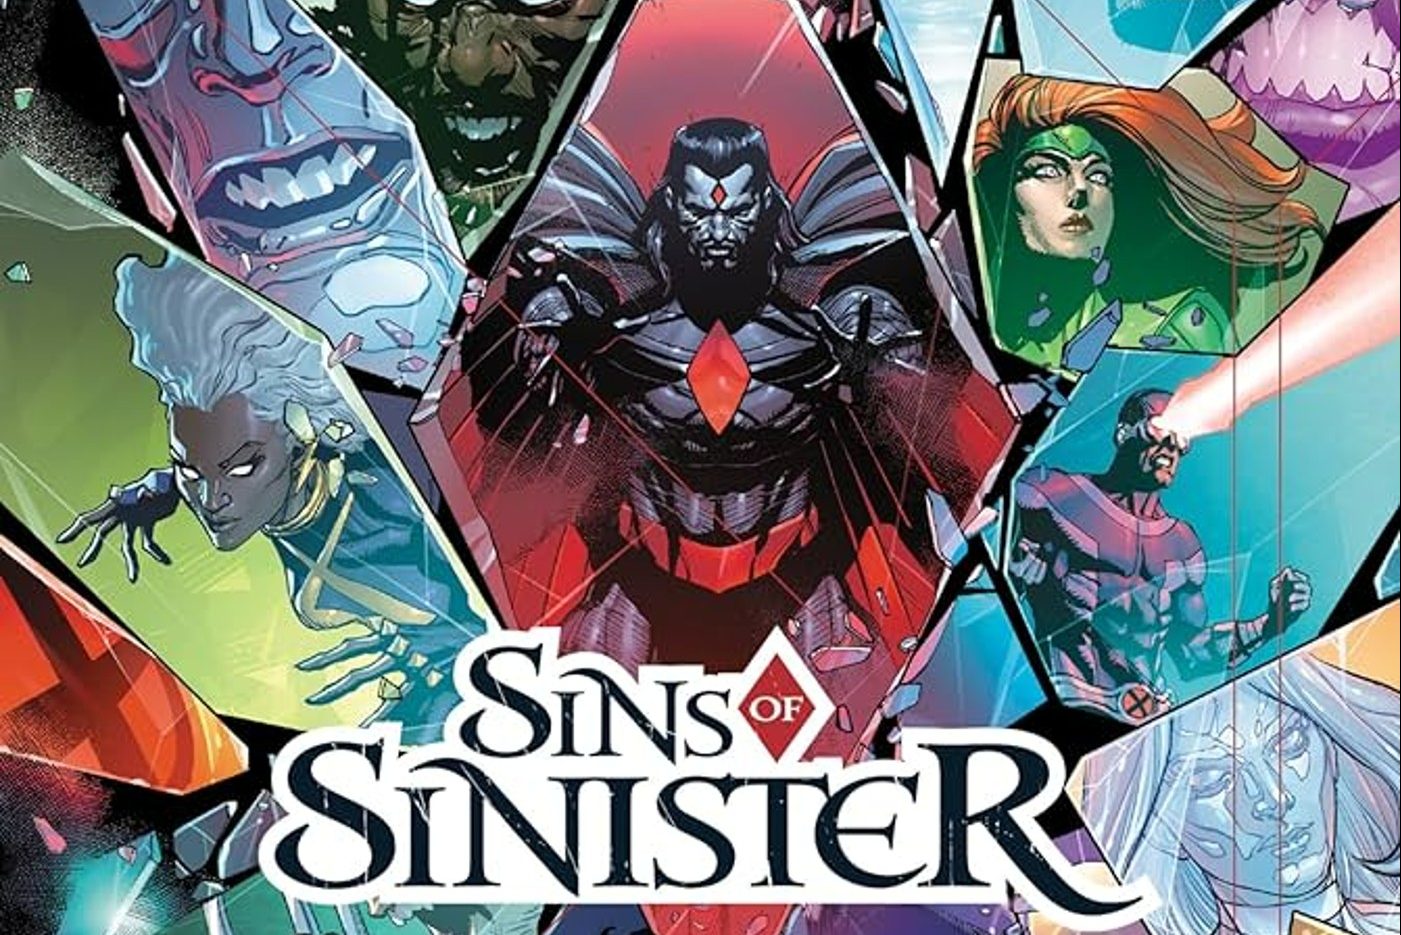 'Sins of Sinister' TPB perfectly collects a disturbing X-Men alternate timeline